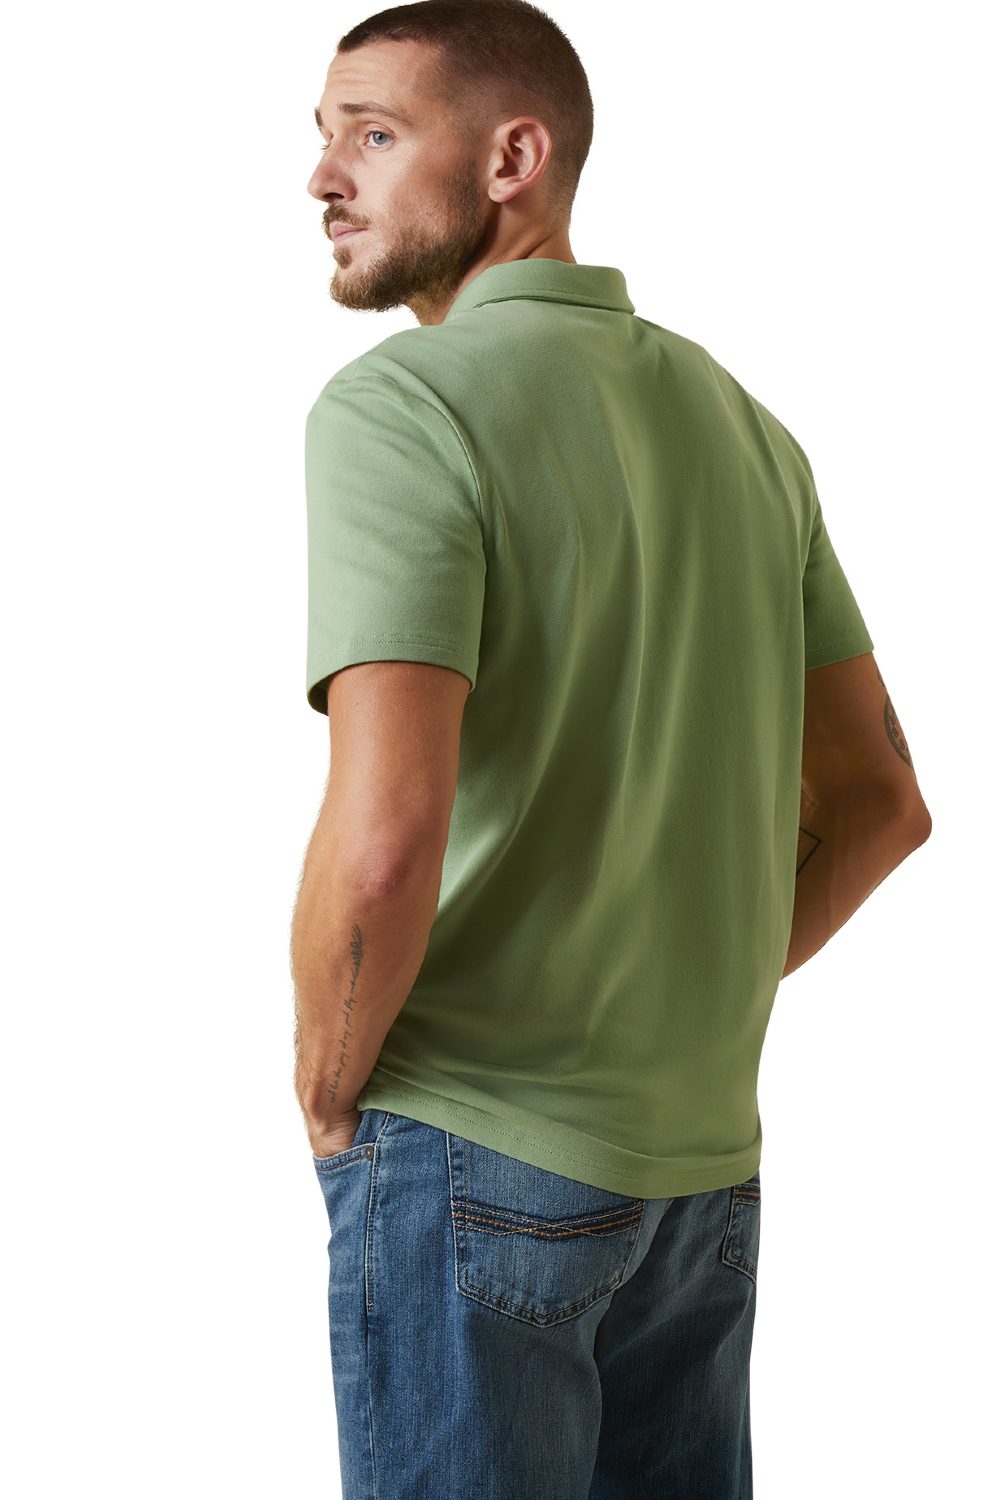 Ariat Medal Polo Shirt In Basil - Showing the back 